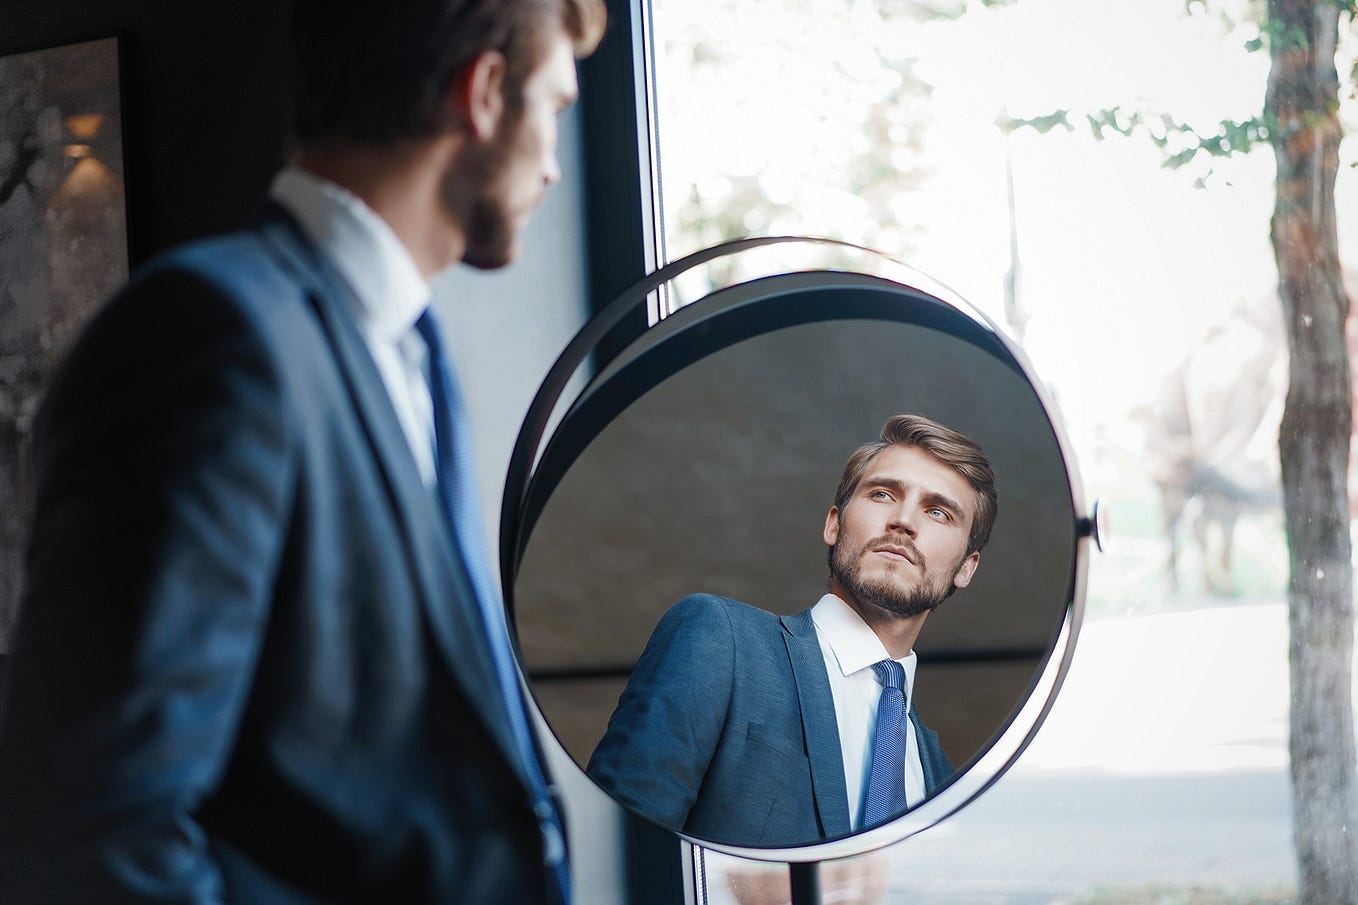 Business owner looking in the mirror — mirroring target audience.